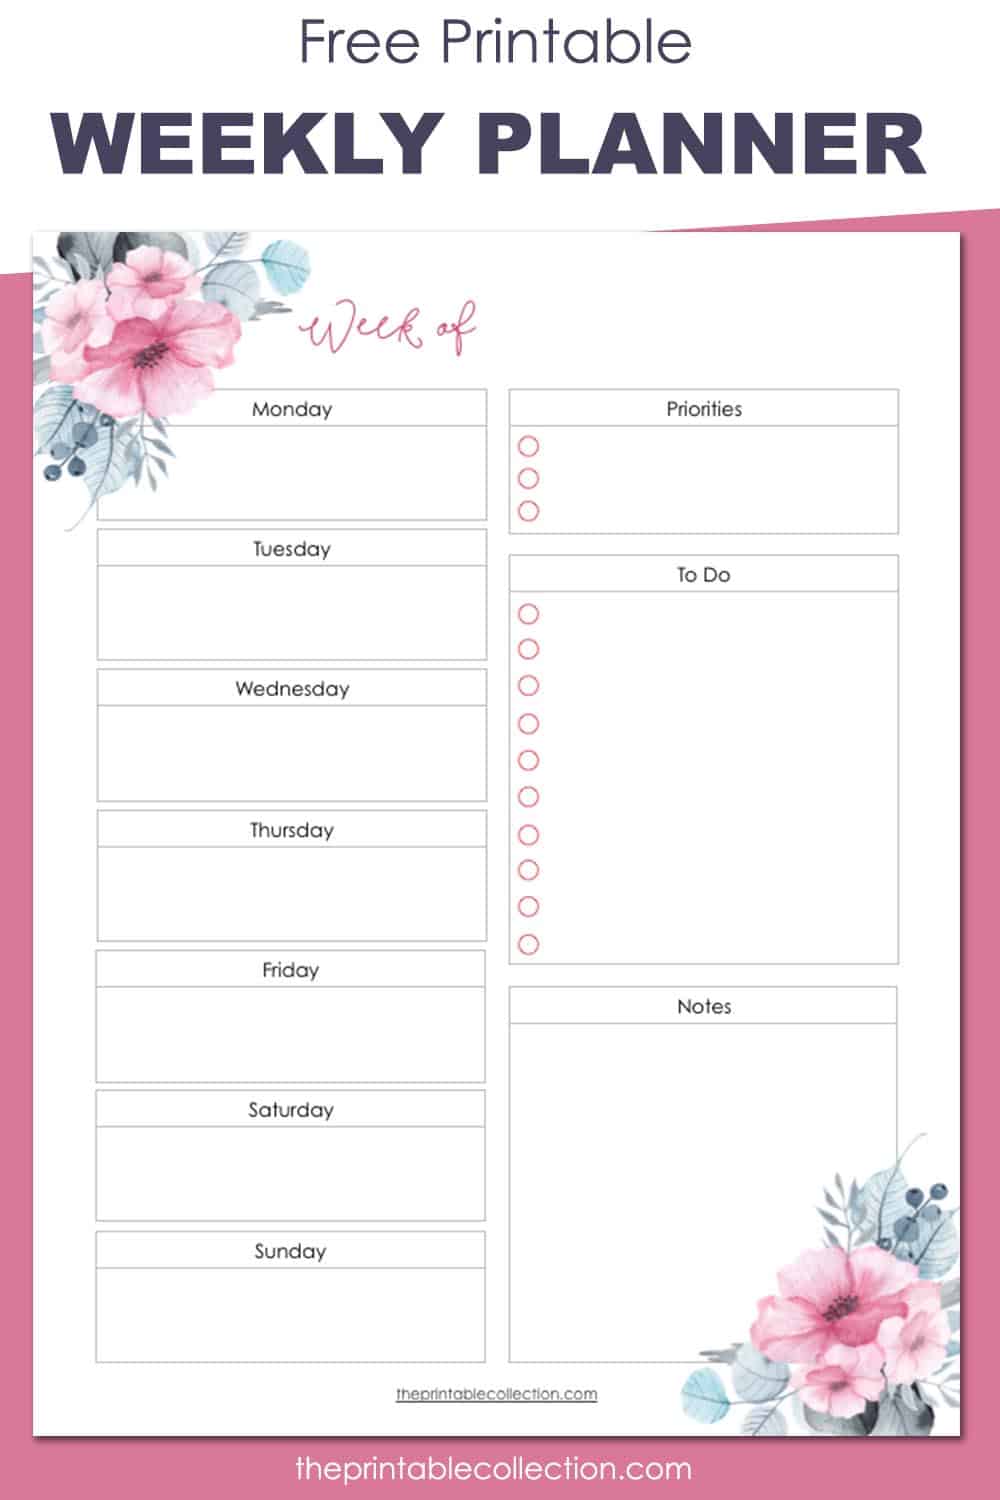 Free Printable Weekly Planner Page | The Printable Collection